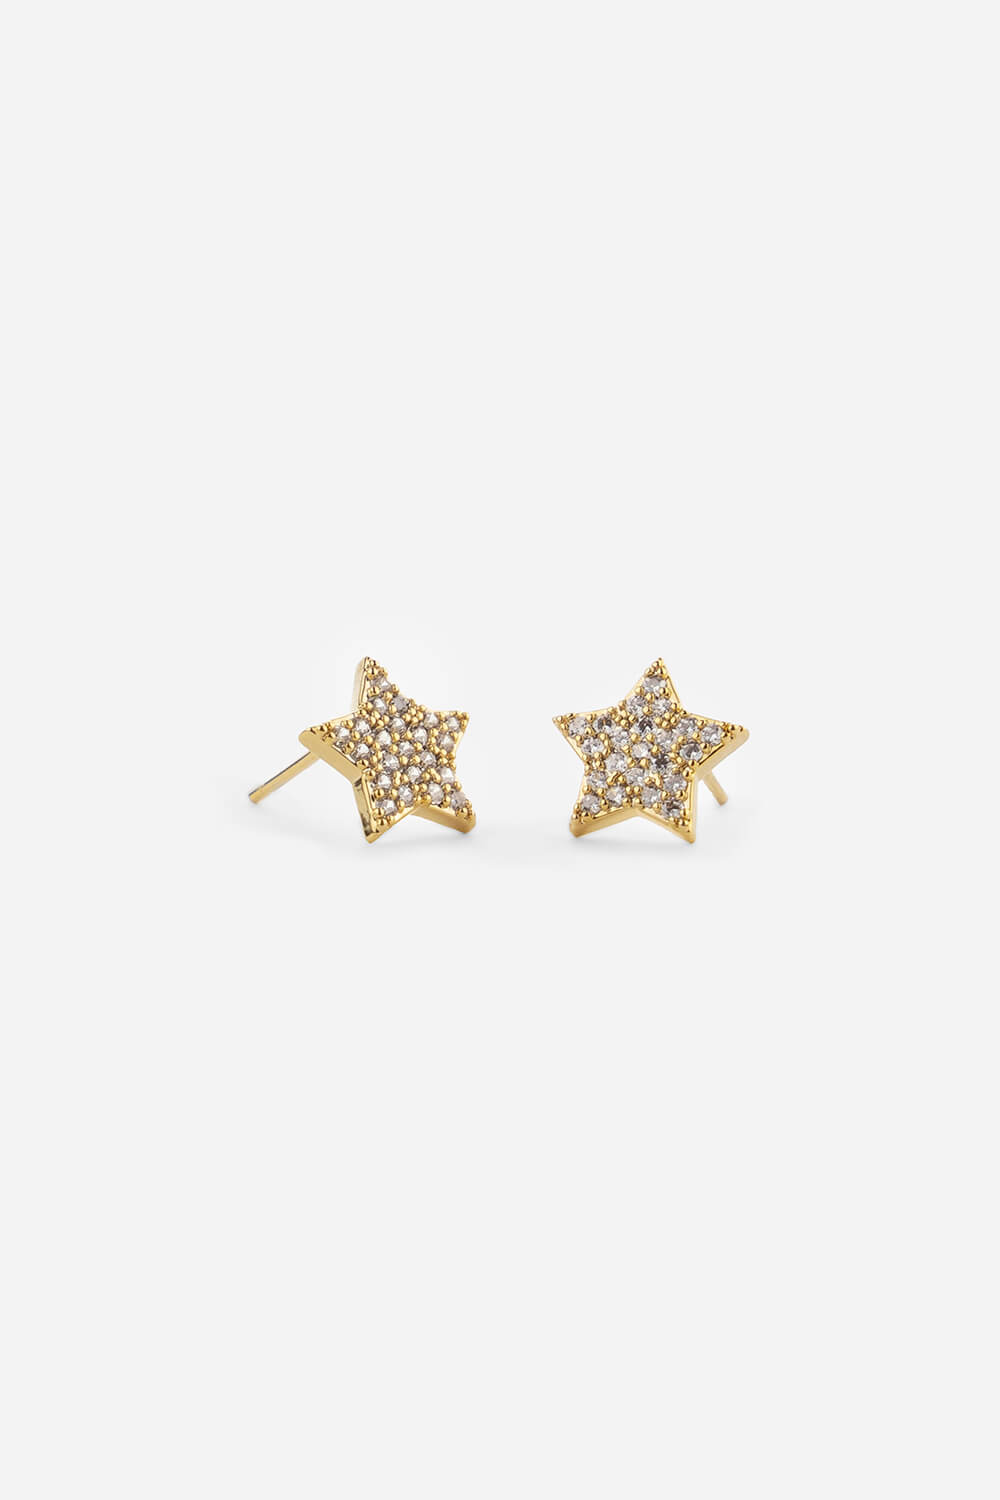 Gold Stainless Steel Plated Star Earrings, Image 2 of 2